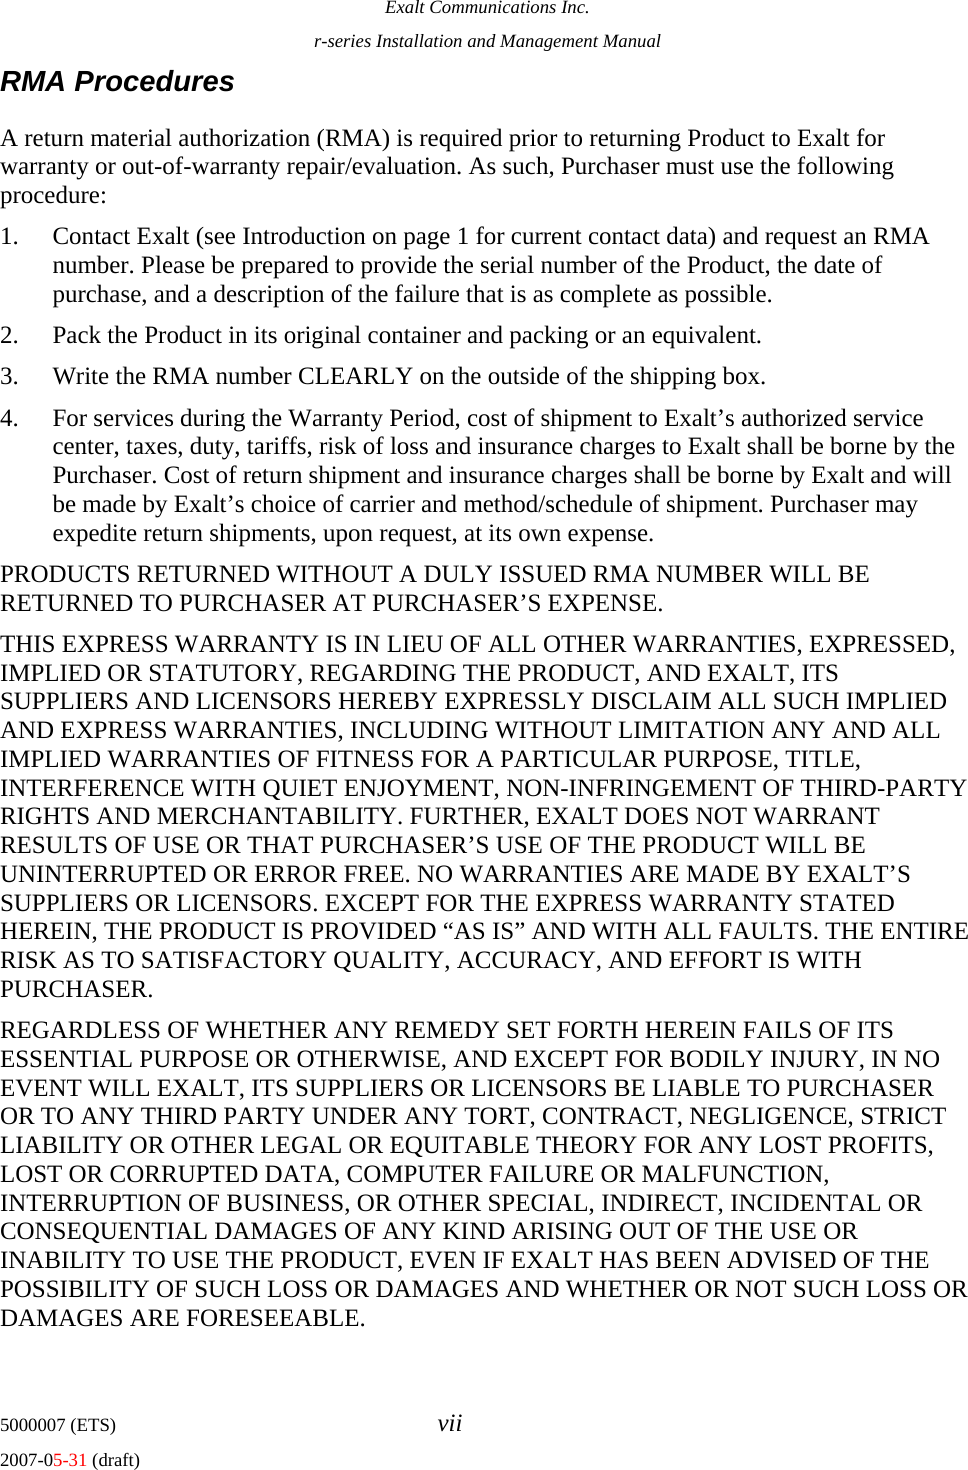 Exalt Communications Inc. r-series Installation and Management Manual 5000007 (ETS)  vii 2007-05-31 (draft) RMA Procedures A return material authorization (RMA) is required prior to returning Product to Exalt for warranty or out-of-warranty repair/evaluation. As such, Purchaser must use the following procedure:  1. Contact Exalt (see Introduction on page 1 for current contact data) and request an RMA number. Please be prepared to provide the serial number of the Product, the date of purchase, and a description of the failure that is as complete as possible. 2. Pack the Product in its original container and packing or an equivalent. 3. Write the RMA number CLEARLY on the outside of the shipping box. 4. For services during the Warranty Period, cost of shipment to Exalt’s authorized service center, taxes, duty, tariffs, risk of loss and insurance charges to Exalt shall be borne by the Purchaser. Cost of return shipment and insurance charges shall be borne by Exalt and will be made by Exalt’s choice of carrier and method/schedule of shipment. Purchaser may expedite return shipments, upon request, at its own expense. PRODUCTS RETURNED WITHOUT A DULY ISSUED RMA NUMBER WILL BE RETURNED TO PURCHASER AT PURCHASER’S EXPENSE. THIS EXPRESS WARRANTY IS IN LIEU OF ALL OTHER WARRANTIES, EXPRESSED, IMPLIED OR STATUTORY, REGARDING THE PRODUCT, AND EXALT, ITS SUPPLIERS AND LICENSORS HEREBY EXPRESSLY DISCLAIM ALL SUCH IMPLIED AND EXPRESS WARRANTIES, INCLUDING WITHOUT LIMITATION ANY AND ALL IMPLIED WARRANTIES OF FITNESS FOR A PARTICULAR PURPOSE, TITLE, INTERFERENCE WITH QUIET ENJOYMENT, NON-INFRINGEMENT OF THIRD-PARTY RIGHTS AND MERCHANTABILITY. FURTHER, EXALT DOES NOT WARRANT RESULTS OF USE OR THAT PURCHASER’S USE OF THE PRODUCT WILL BE UNINTERRUPTED OR ERROR FREE. NO WARRANTIES ARE MADE BY EXALT’S SUPPLIERS OR LICENSORS. EXCEPT FOR THE EXPRESS WARRANTY STATED HEREIN, THE PRODUCT IS PROVIDED “AS IS” AND WITH ALL FAULTS. THE ENTIRE RISK AS TO SATISFACTORY QUALITY, ACCURACY, AND EFFORT IS WITH PURCHASER.    REGARDLESS OF WHETHER ANY REMEDY SET FORTH HEREIN FAILS OF ITS ESSENTIAL PURPOSE OR OTHERWISE, AND EXCEPT FOR BODILY INJURY, IN NO EVENT WILL EXALT, ITS SUPPLIERS OR LICENSORS BE LIABLE TO PURCHASER OR TO ANY THIRD PARTY UNDER ANY TORT, CONTRACT, NEGLIGENCE, STRICT LIABILITY OR OTHER LEGAL OR EQUITABLE THEORY FOR ANY LOST PROFITS, LOST OR CORRUPTED DATA, COMPUTER FAILURE OR MALFUNCTION, INTERRUPTION OF BUSINESS, OR OTHER SPECIAL, INDIRECT, INCIDENTAL OR CONSEQUENTIAL DAMAGES OF ANY KIND ARISING OUT OF THE USE OR INABILITY TO USE THE PRODUCT, EVEN IF EXALT HAS BEEN ADVISED OF THE POSSIBILITY OF SUCH LOSS OR DAMAGES AND WHETHER OR NOT SUCH LOSS OR DAMAGES ARE FORESEEABLE.   